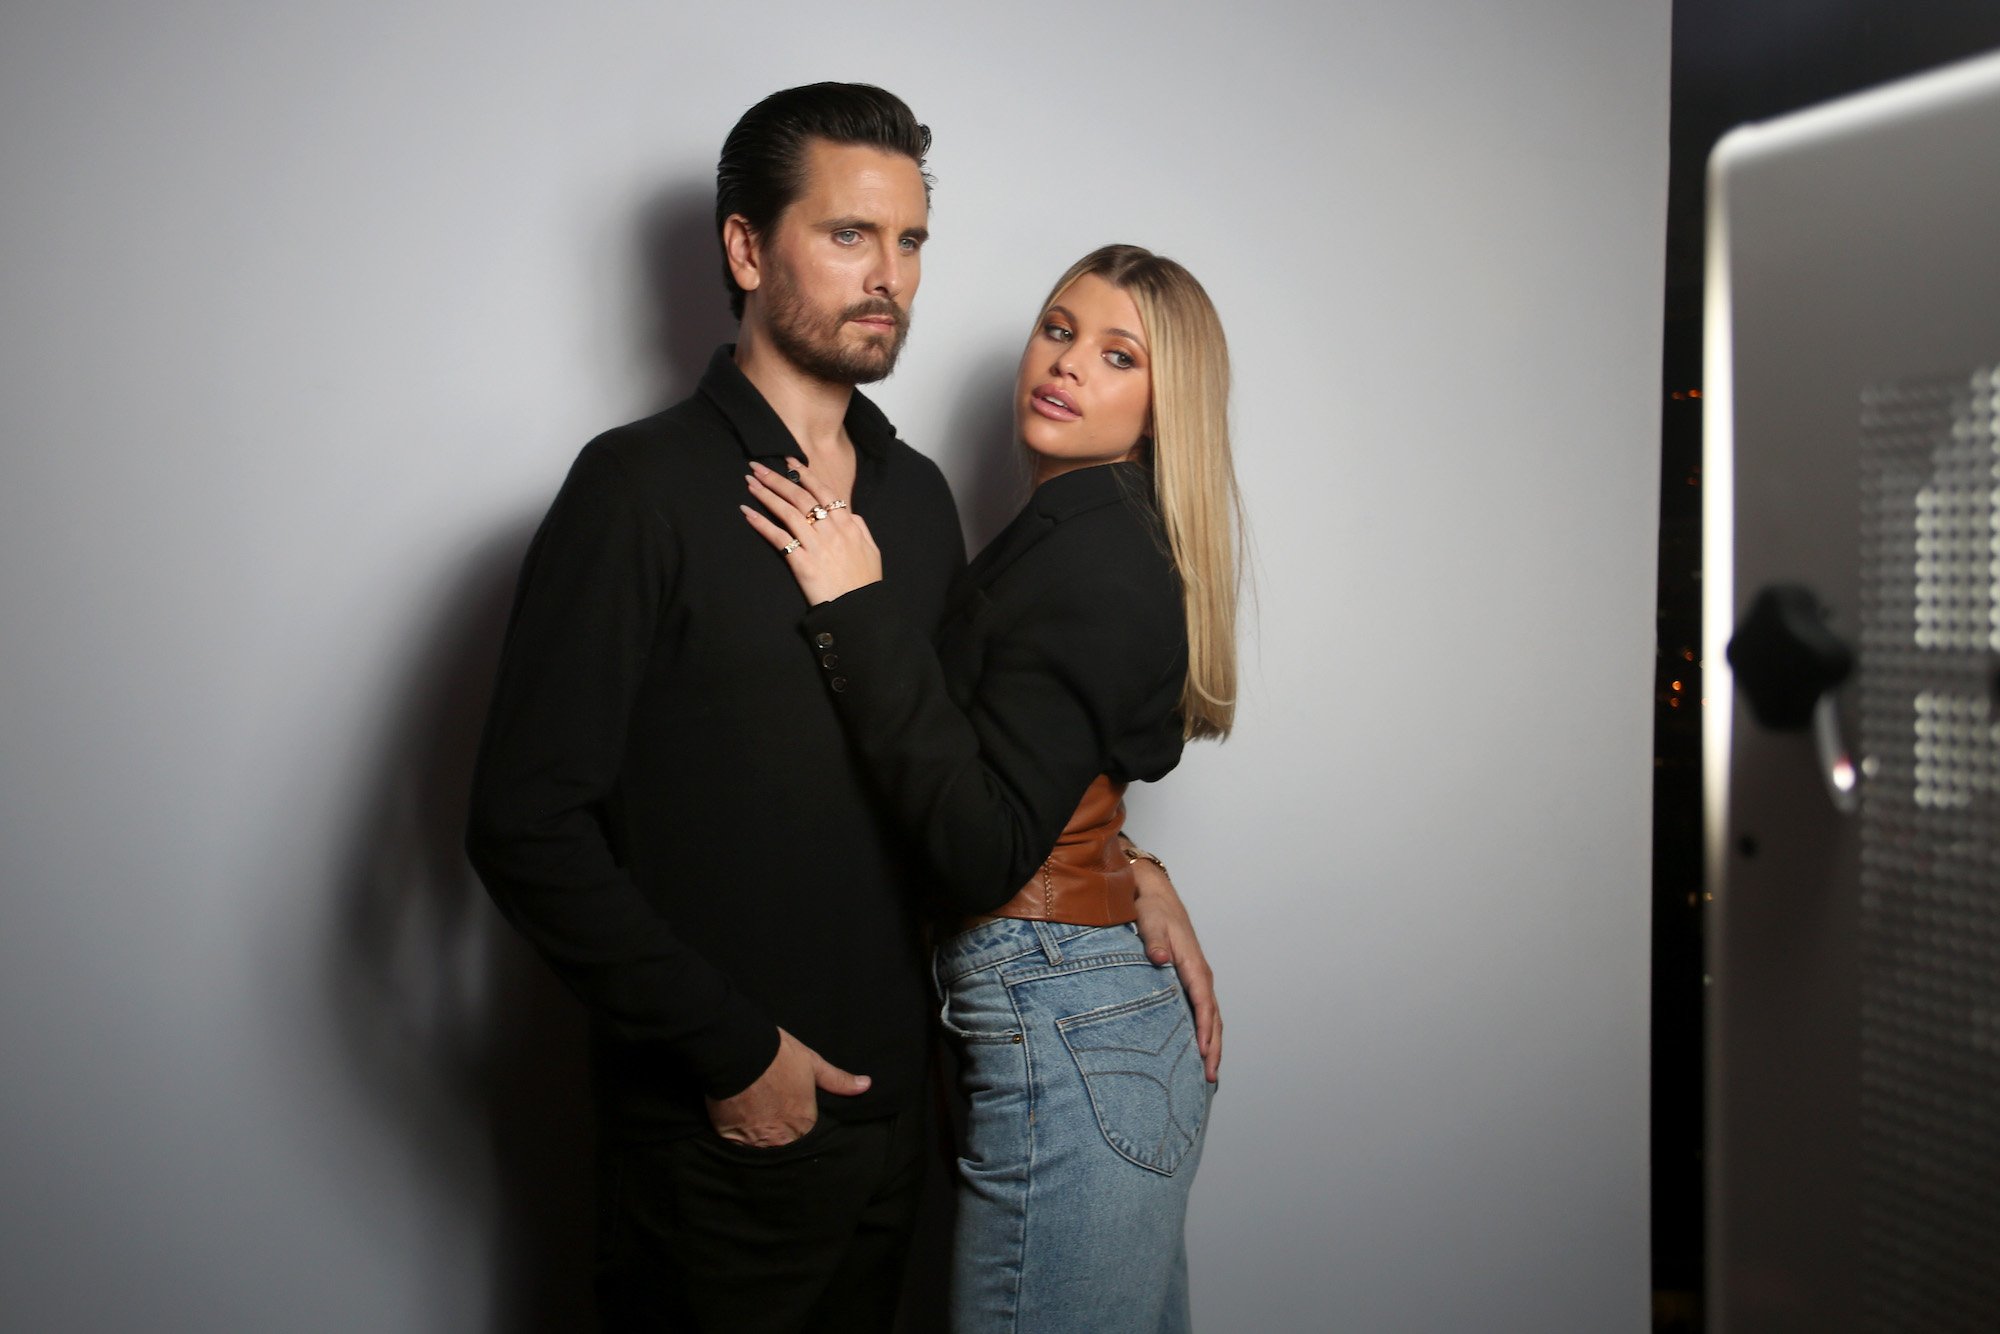 Scott Disick and Sofia Richie at an event